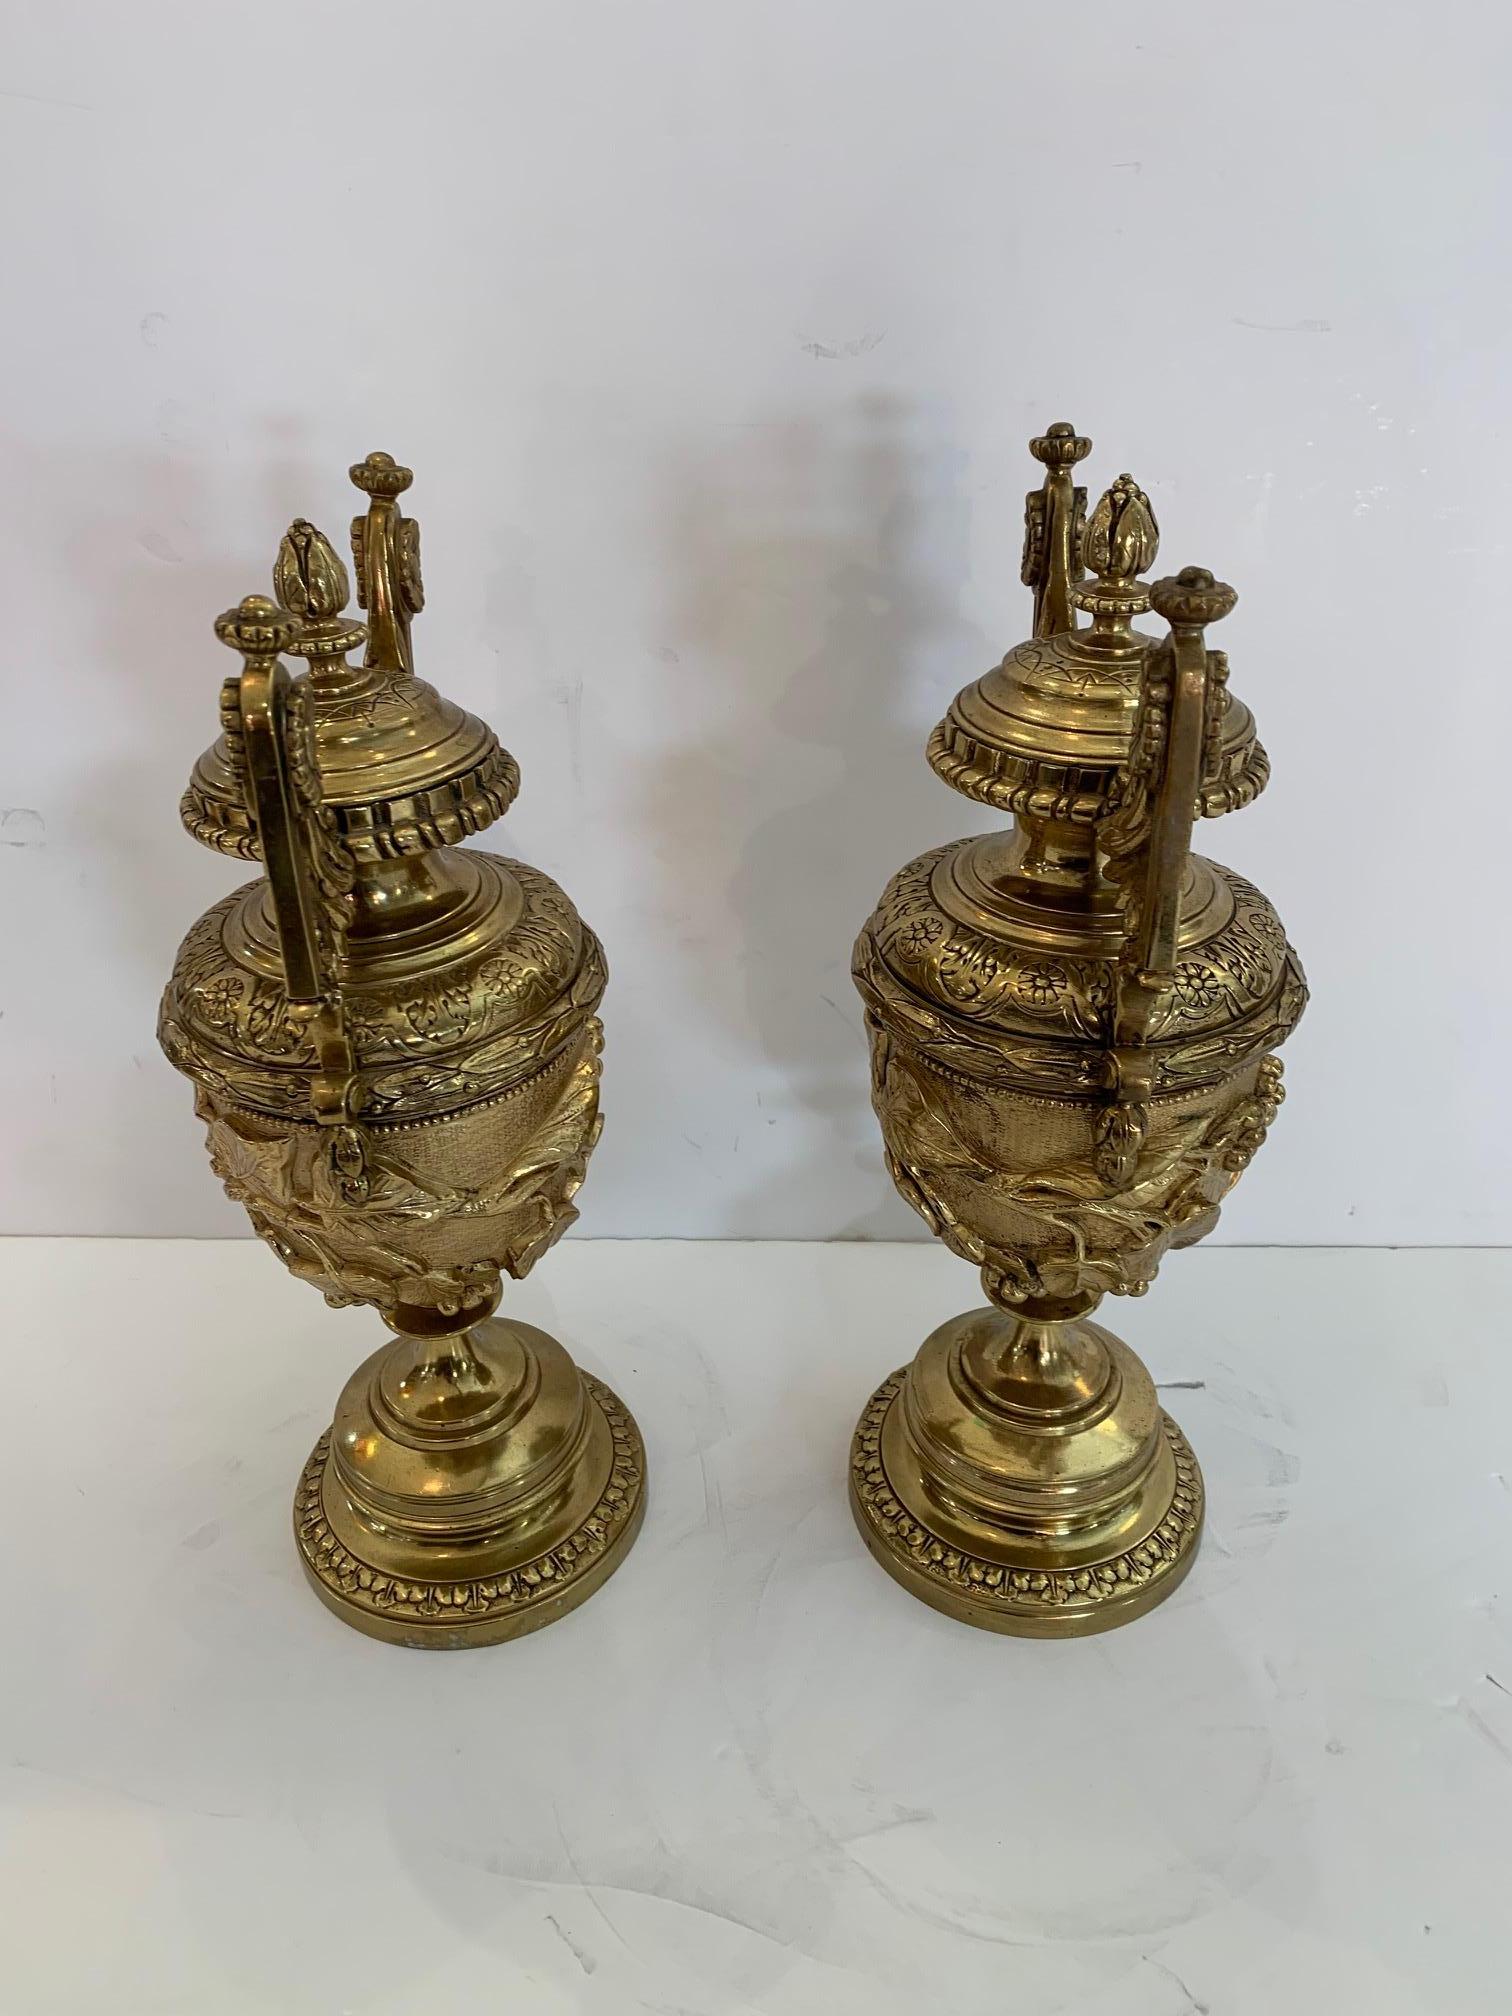 Gorgeous Ornate Pair of Revival Style Cast Brass Relief Lidded Urns For Sale 6